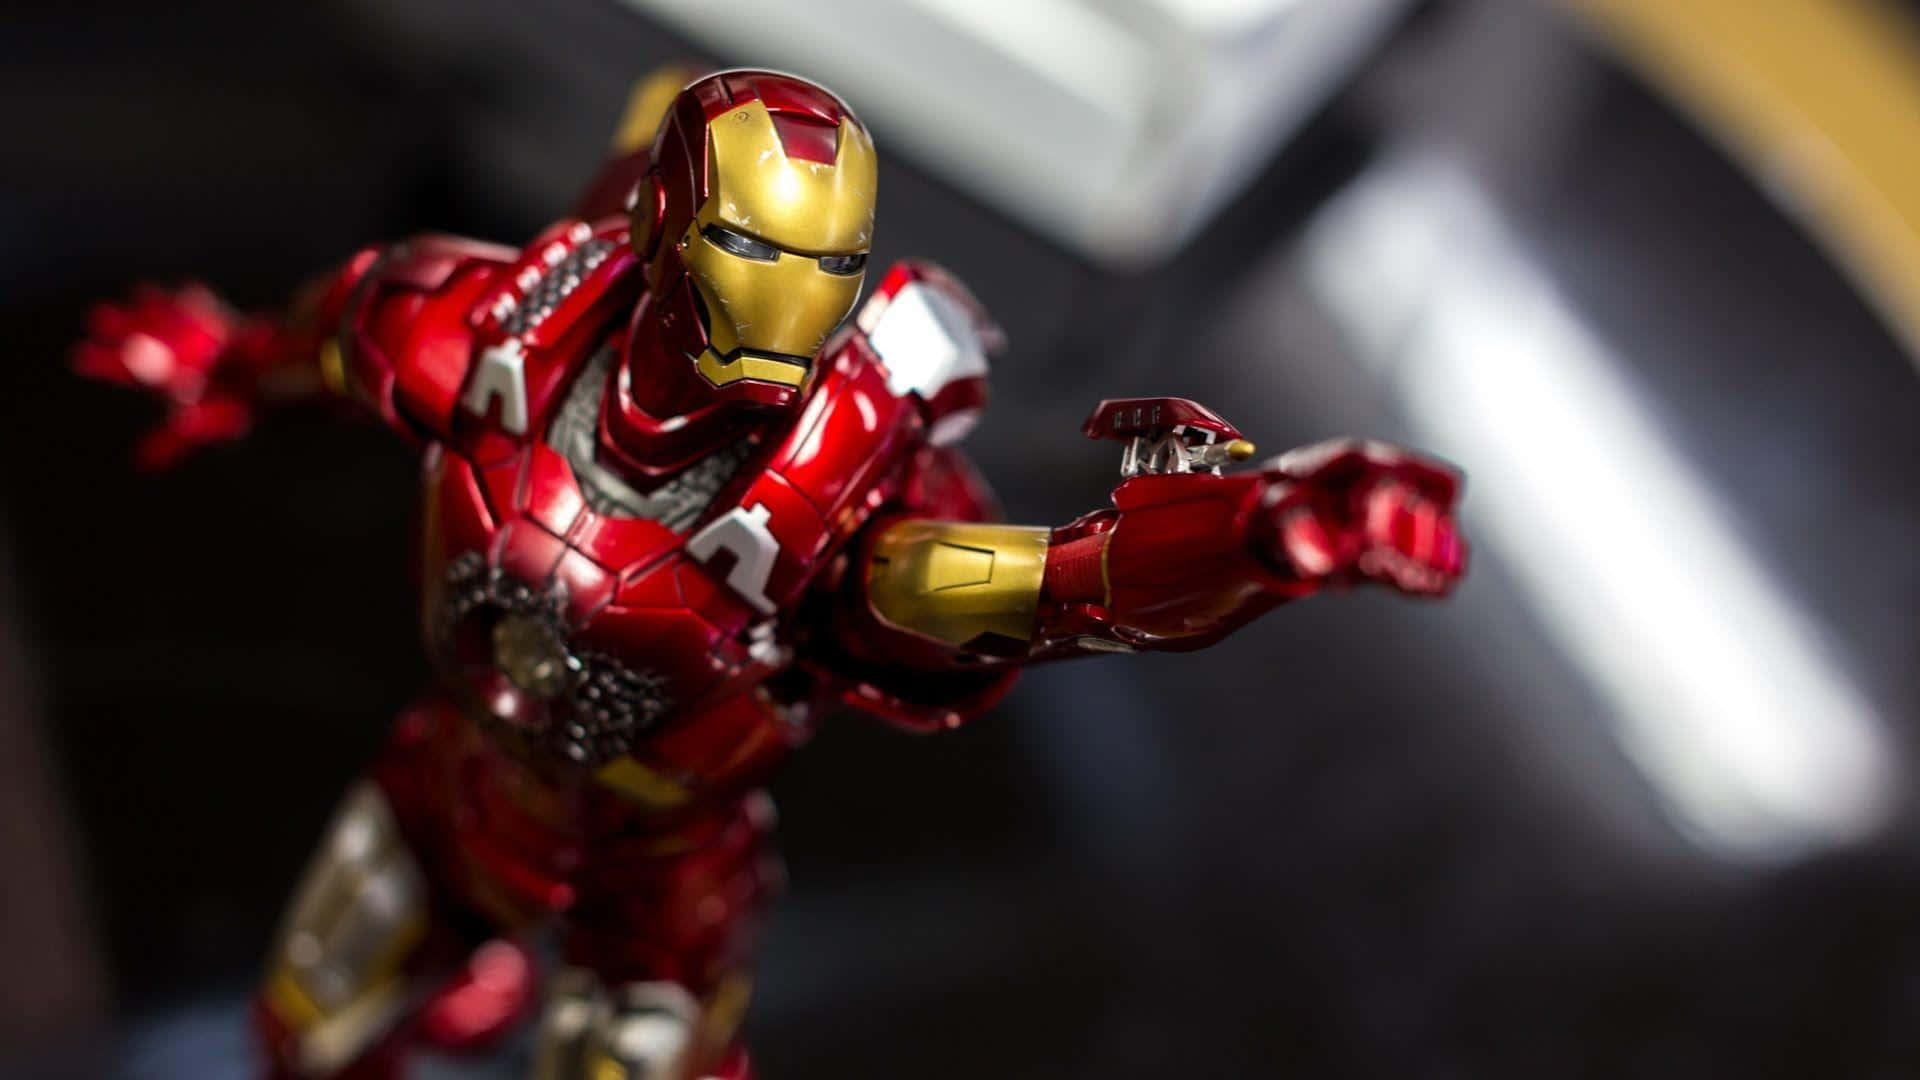 Check Out This Iron Man Action Figure Collection Wallpaper